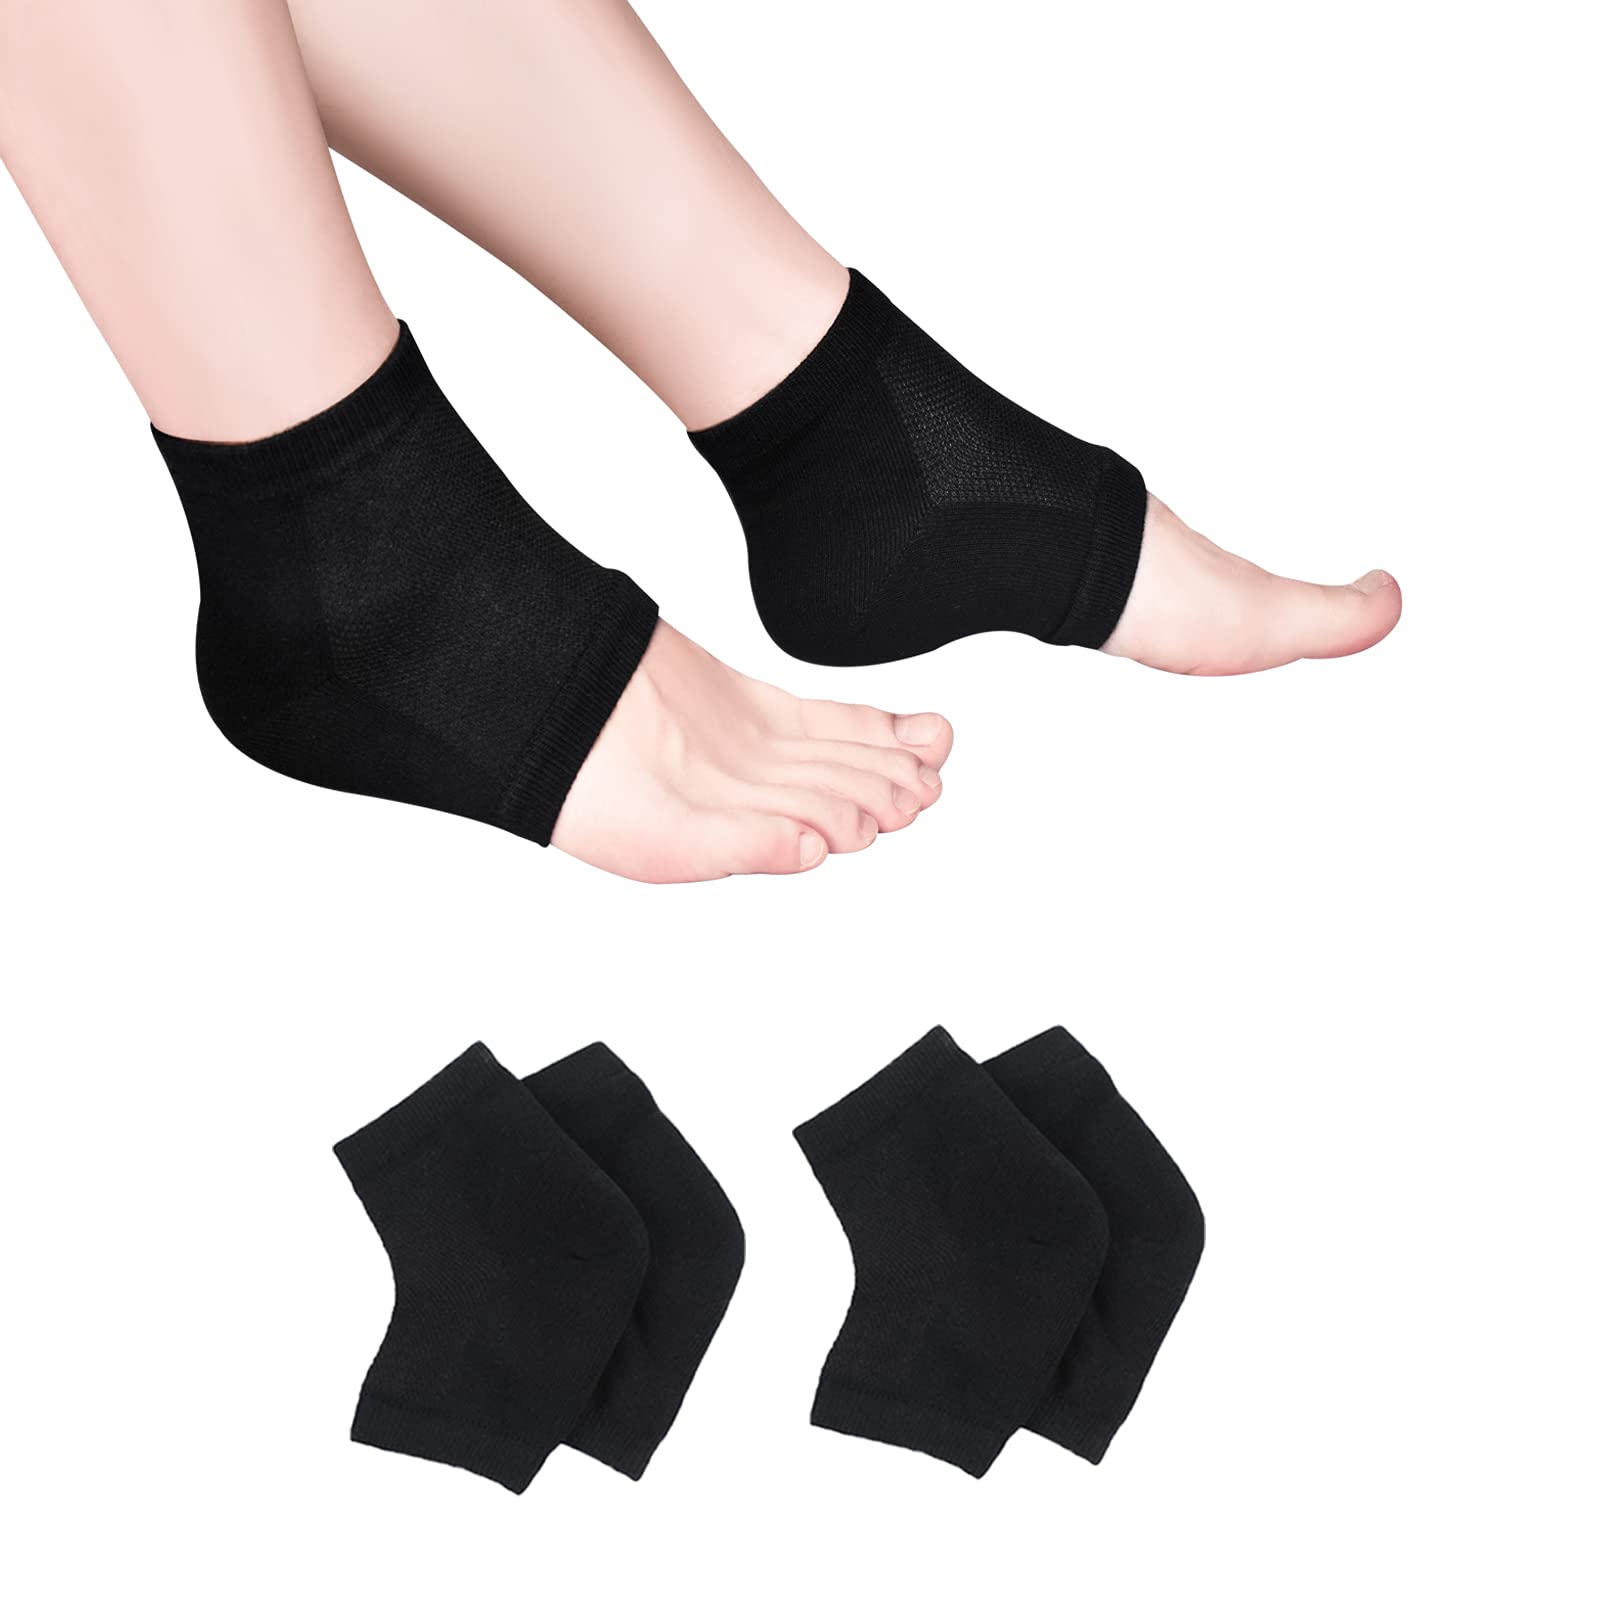 Moisturizing Socks for Cracked Heels Socks Treat Dry Feet Pain Relief for  Rough Skin With Foot